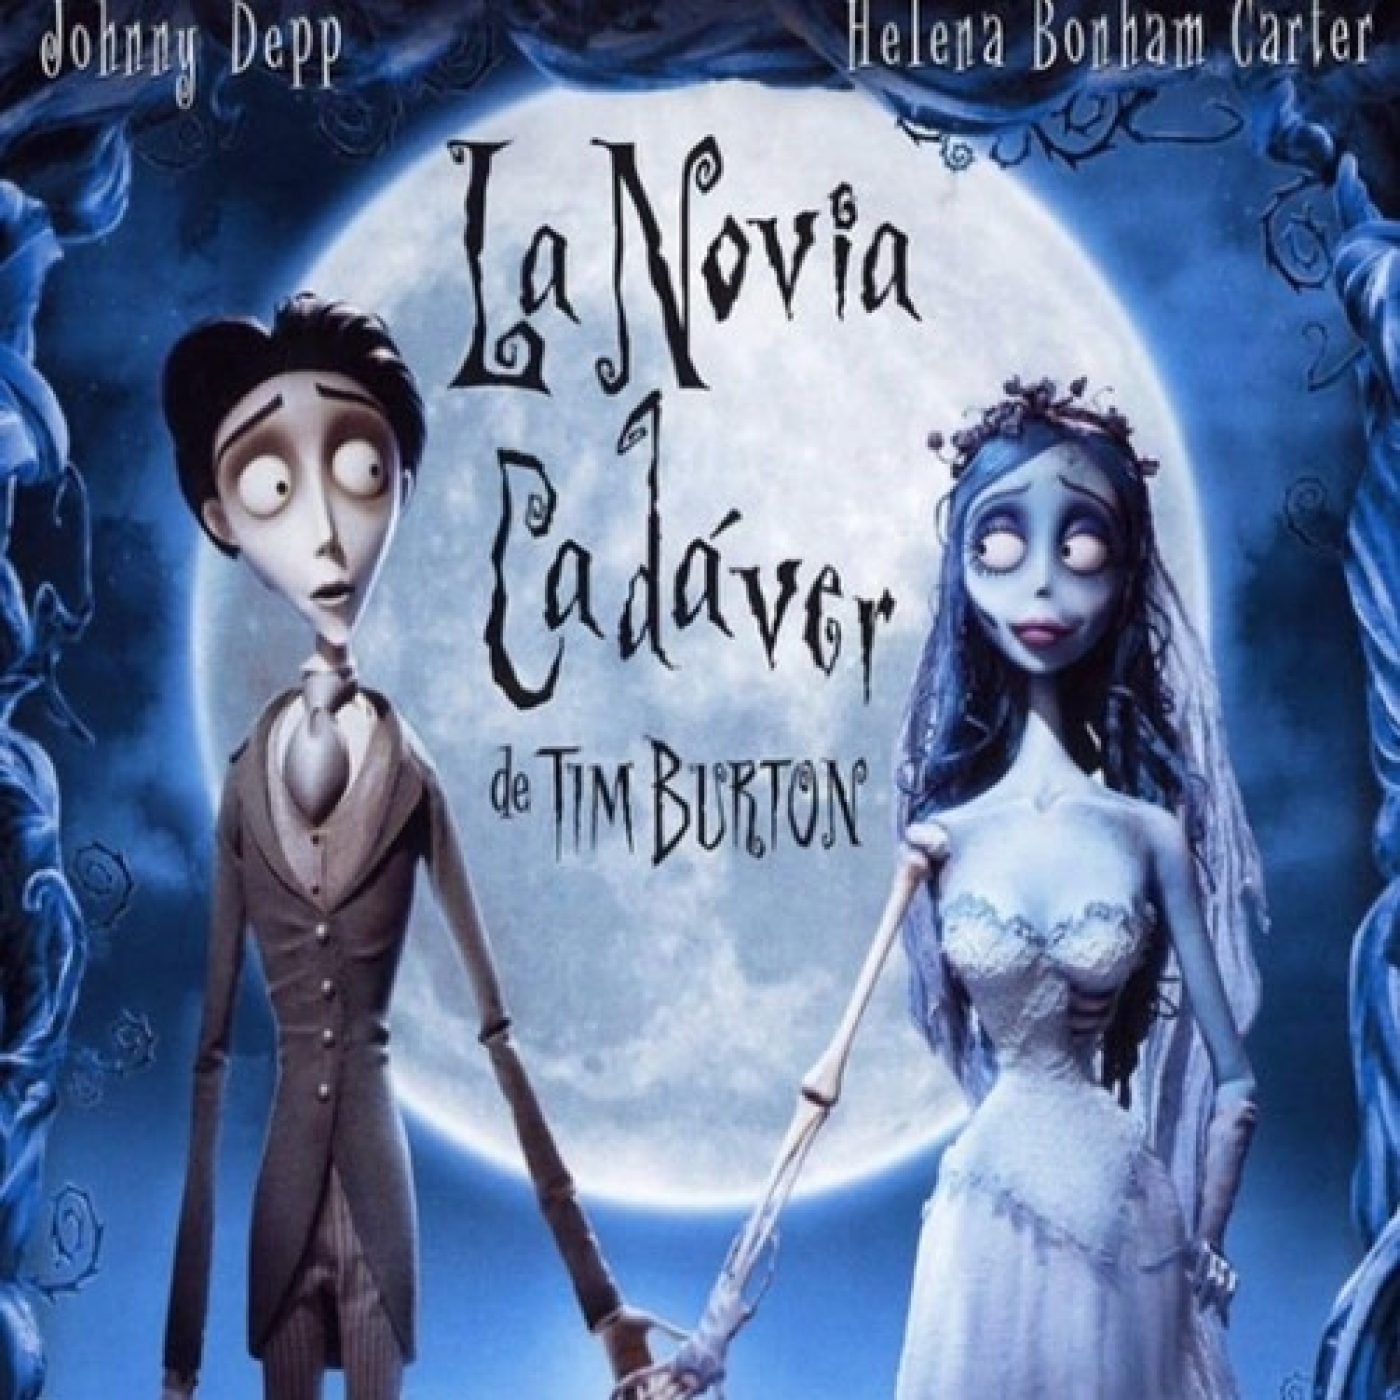 Movies Requests - Corpse Bride -2005